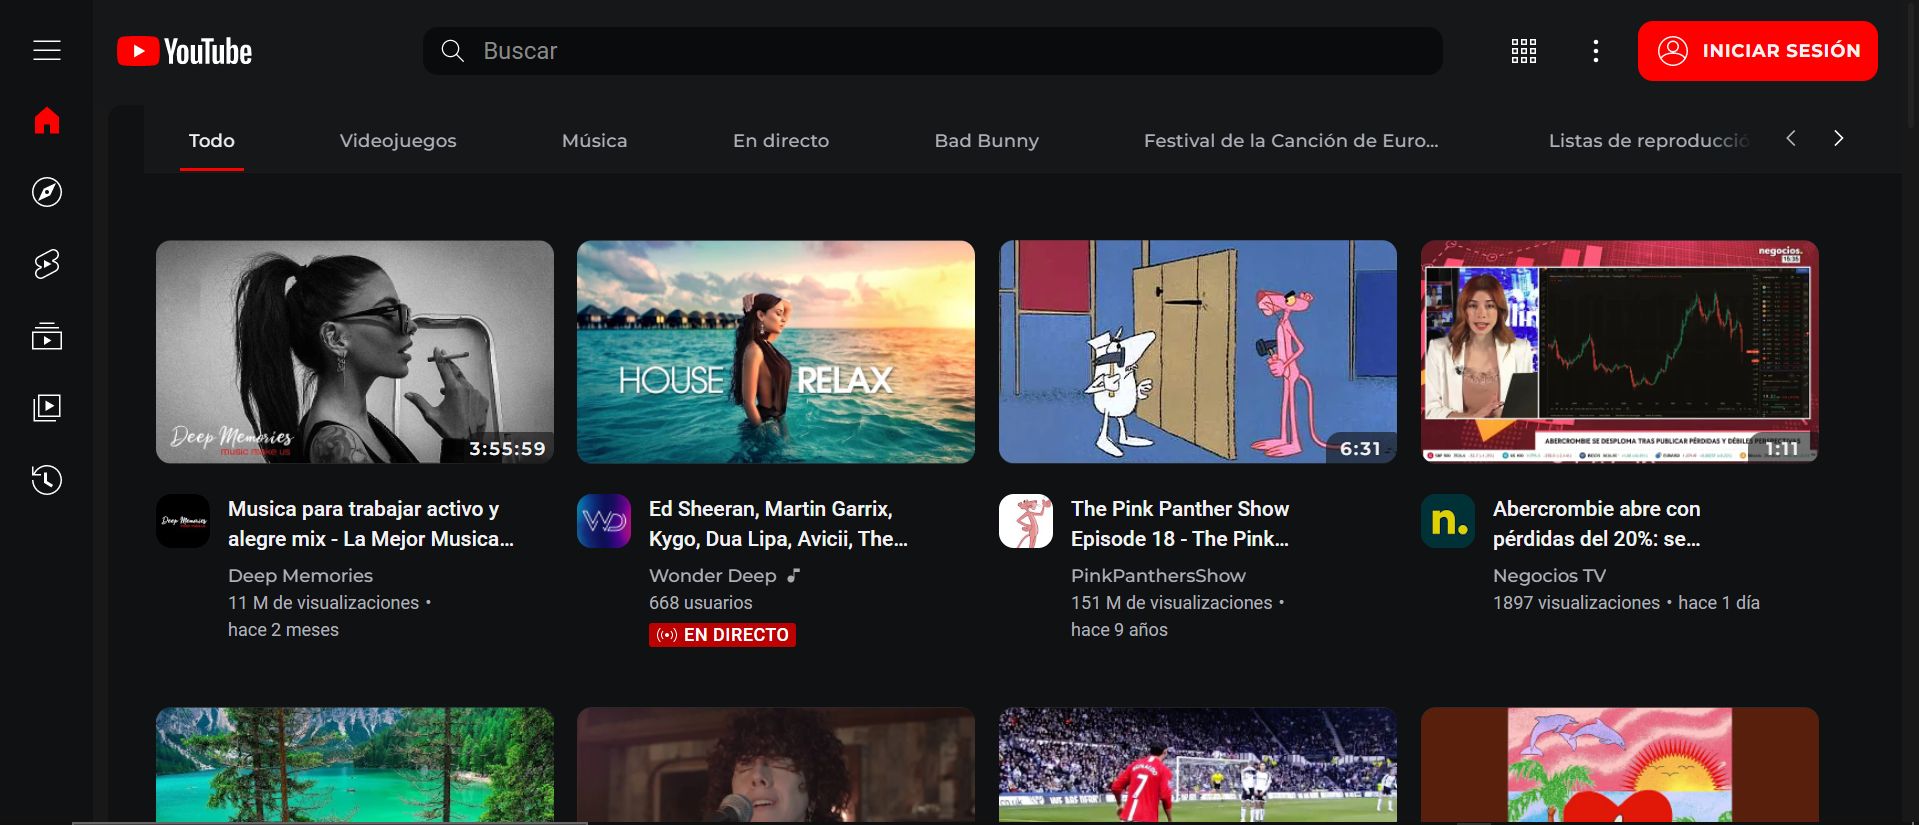 Youtube Redesign (Works on new design) — UserStyles.world